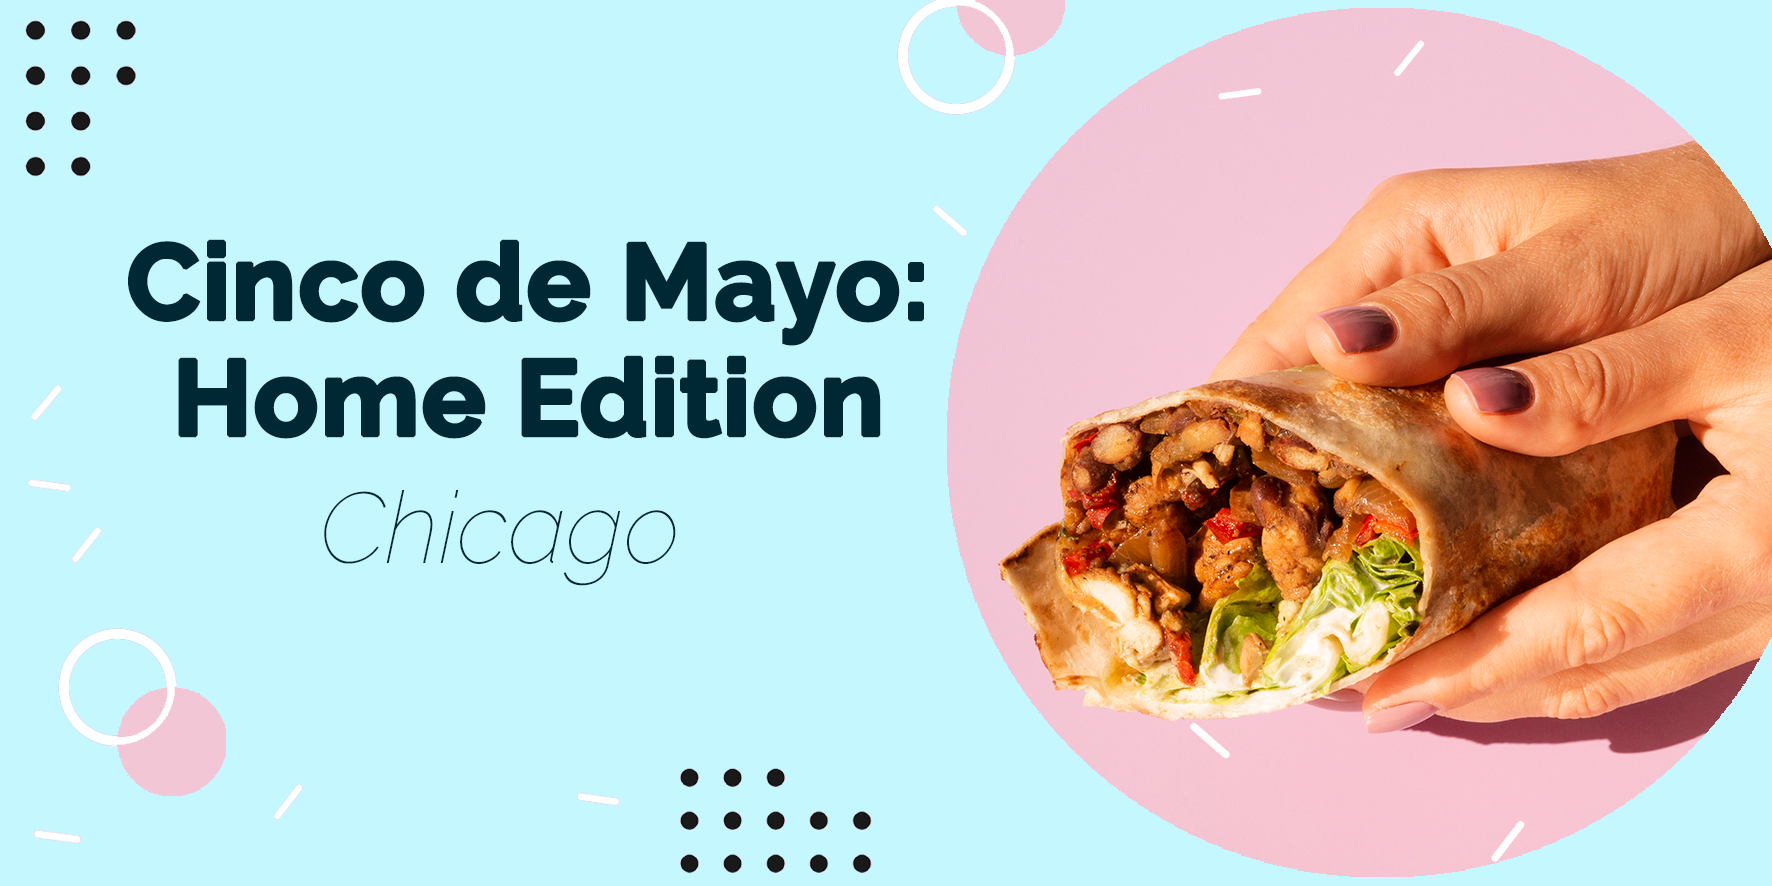 Celebrate Cinco de Mayo with Great Options in Chicago